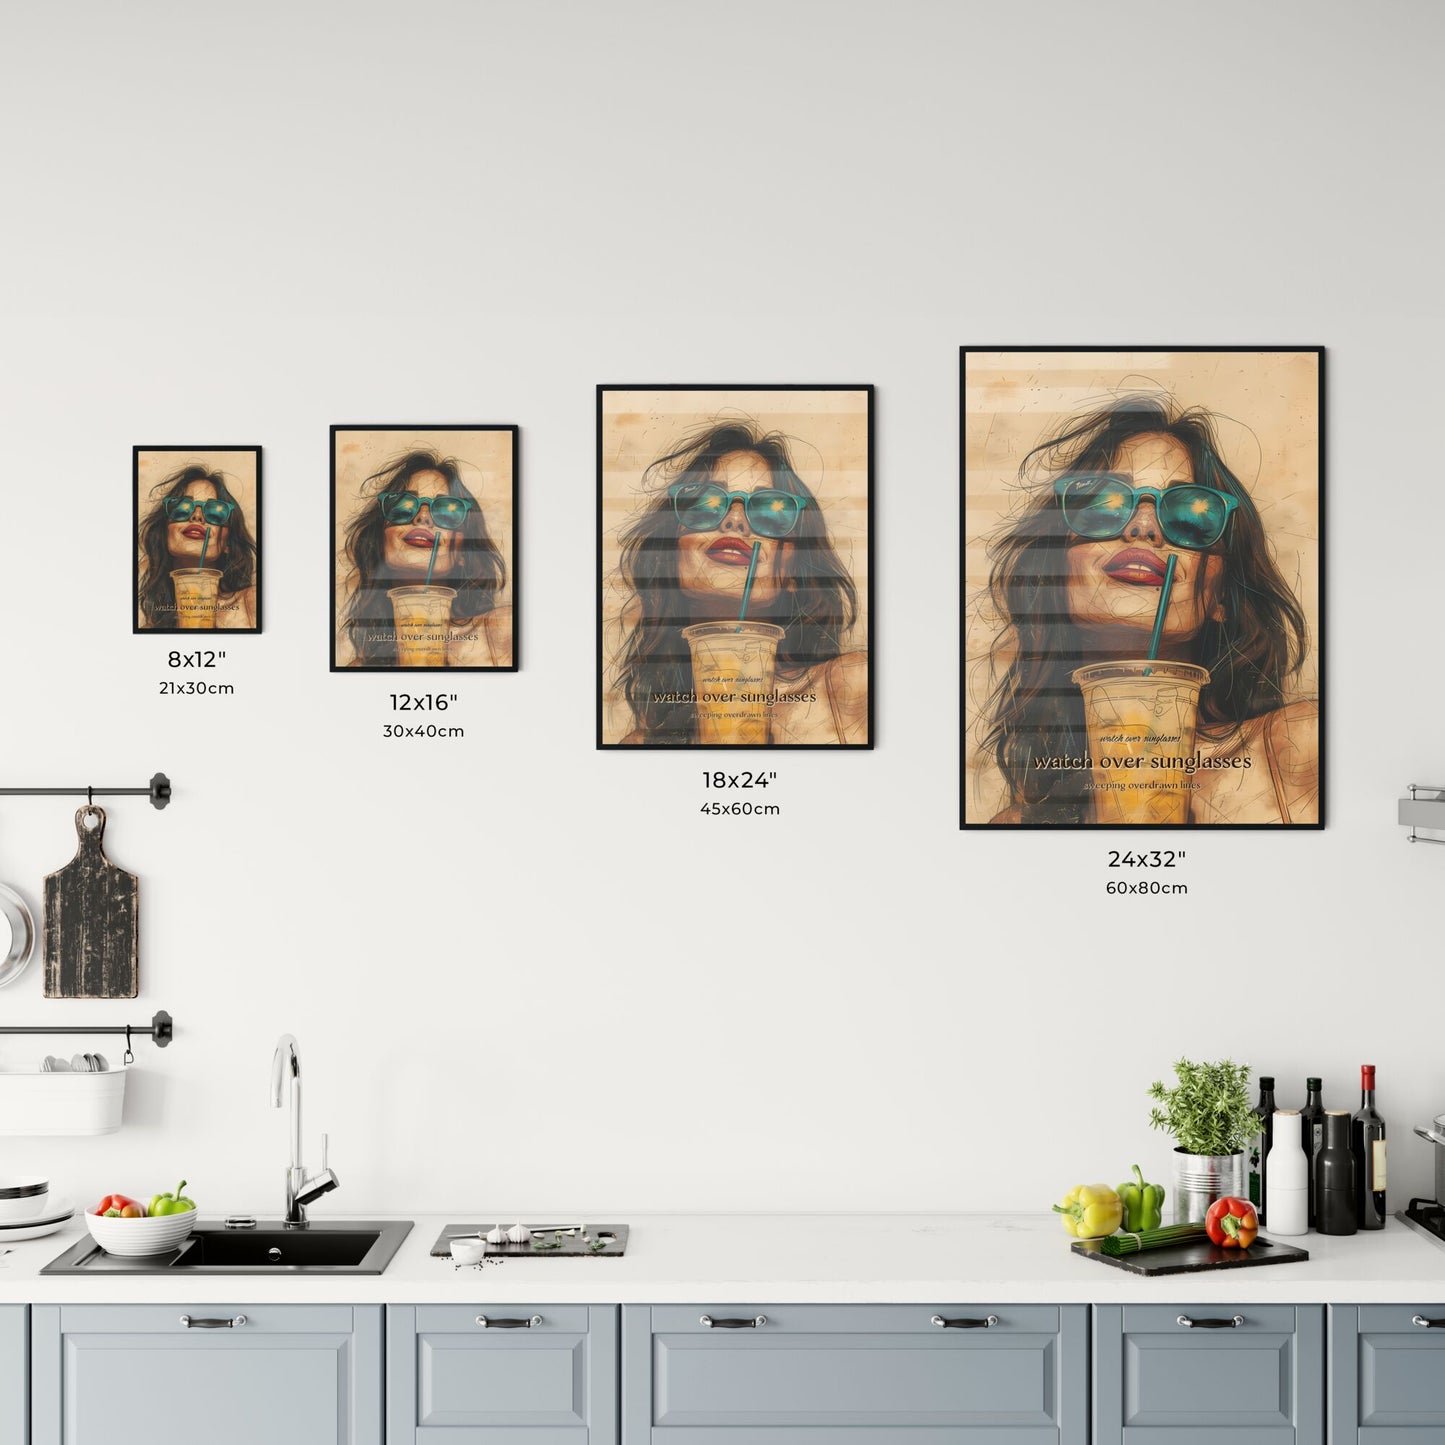 watch over sunglasses, watch over sunglasses, sweeping overdrawn lines, A Poster of a woman wearing sunglasses and drinking from a plastic cup Default Title